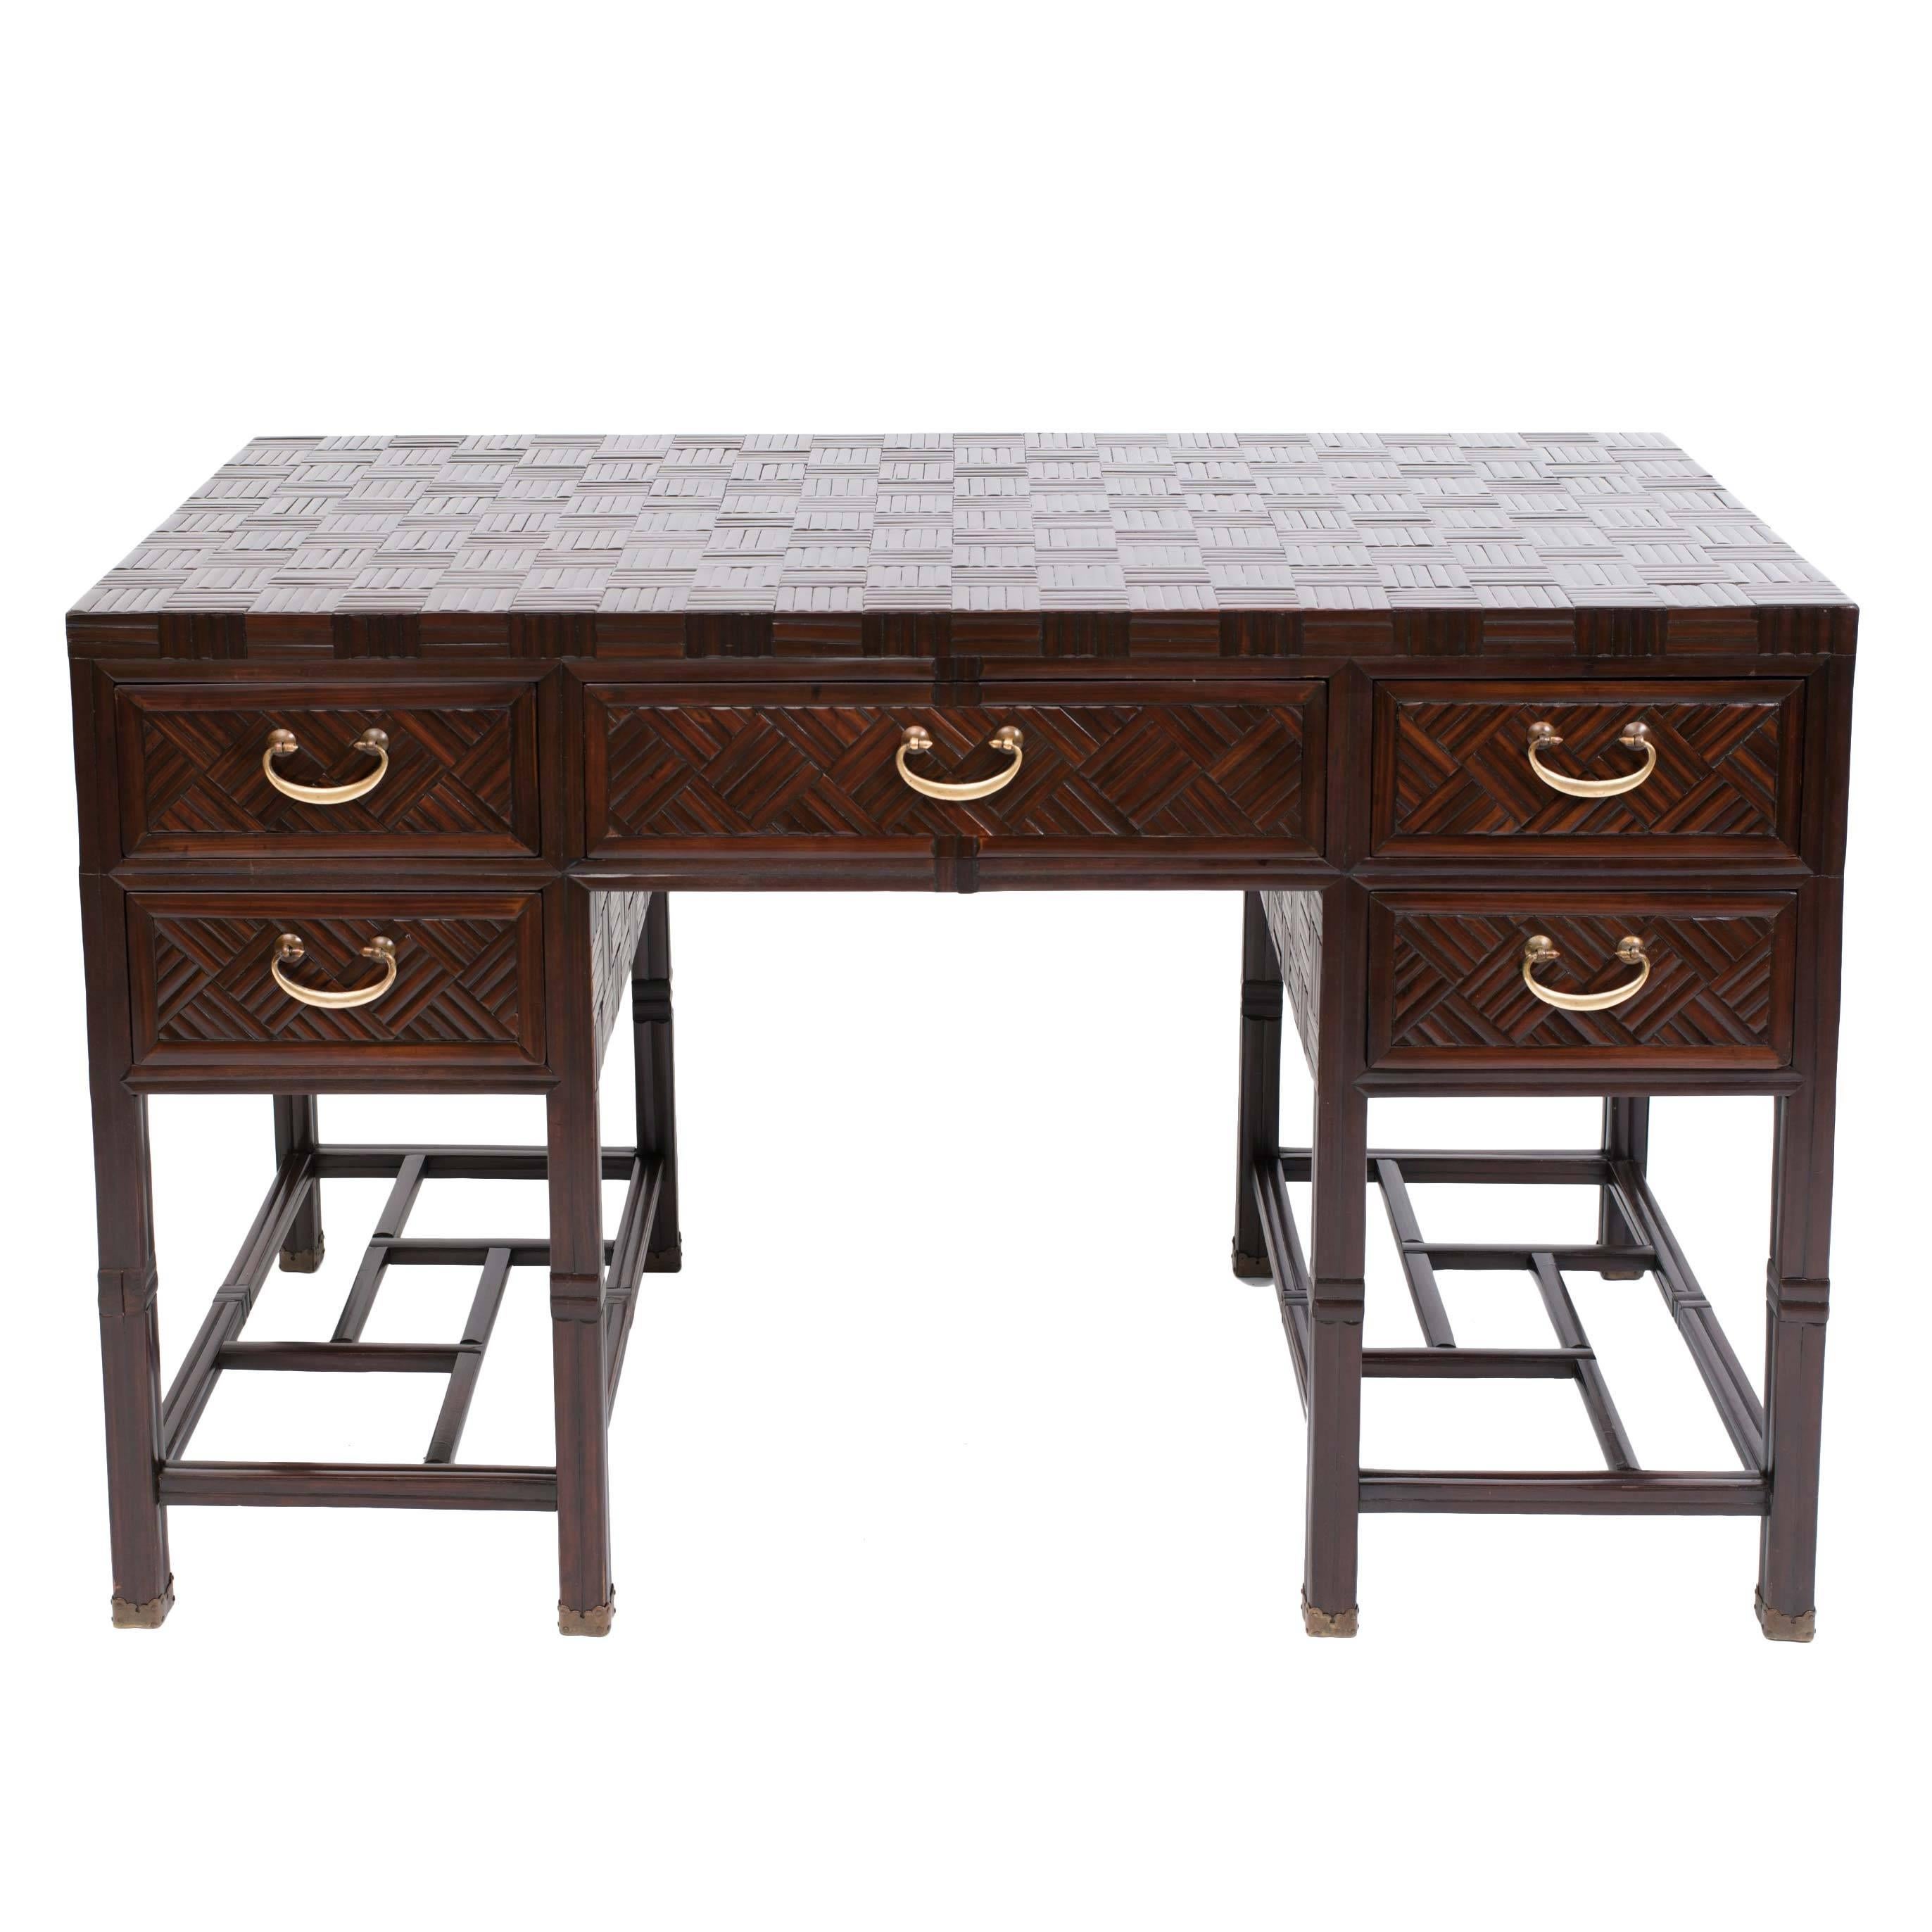 Gorgeous stained bamboo and hardwood campaign desk with five drawers. Finely detailed parquet work on top, sides and back of desk. Solid brass curved handles. Brass sabot detail to carved hardwood legs. 
Anglo Chinese, Hong Kong ,c. 1960's